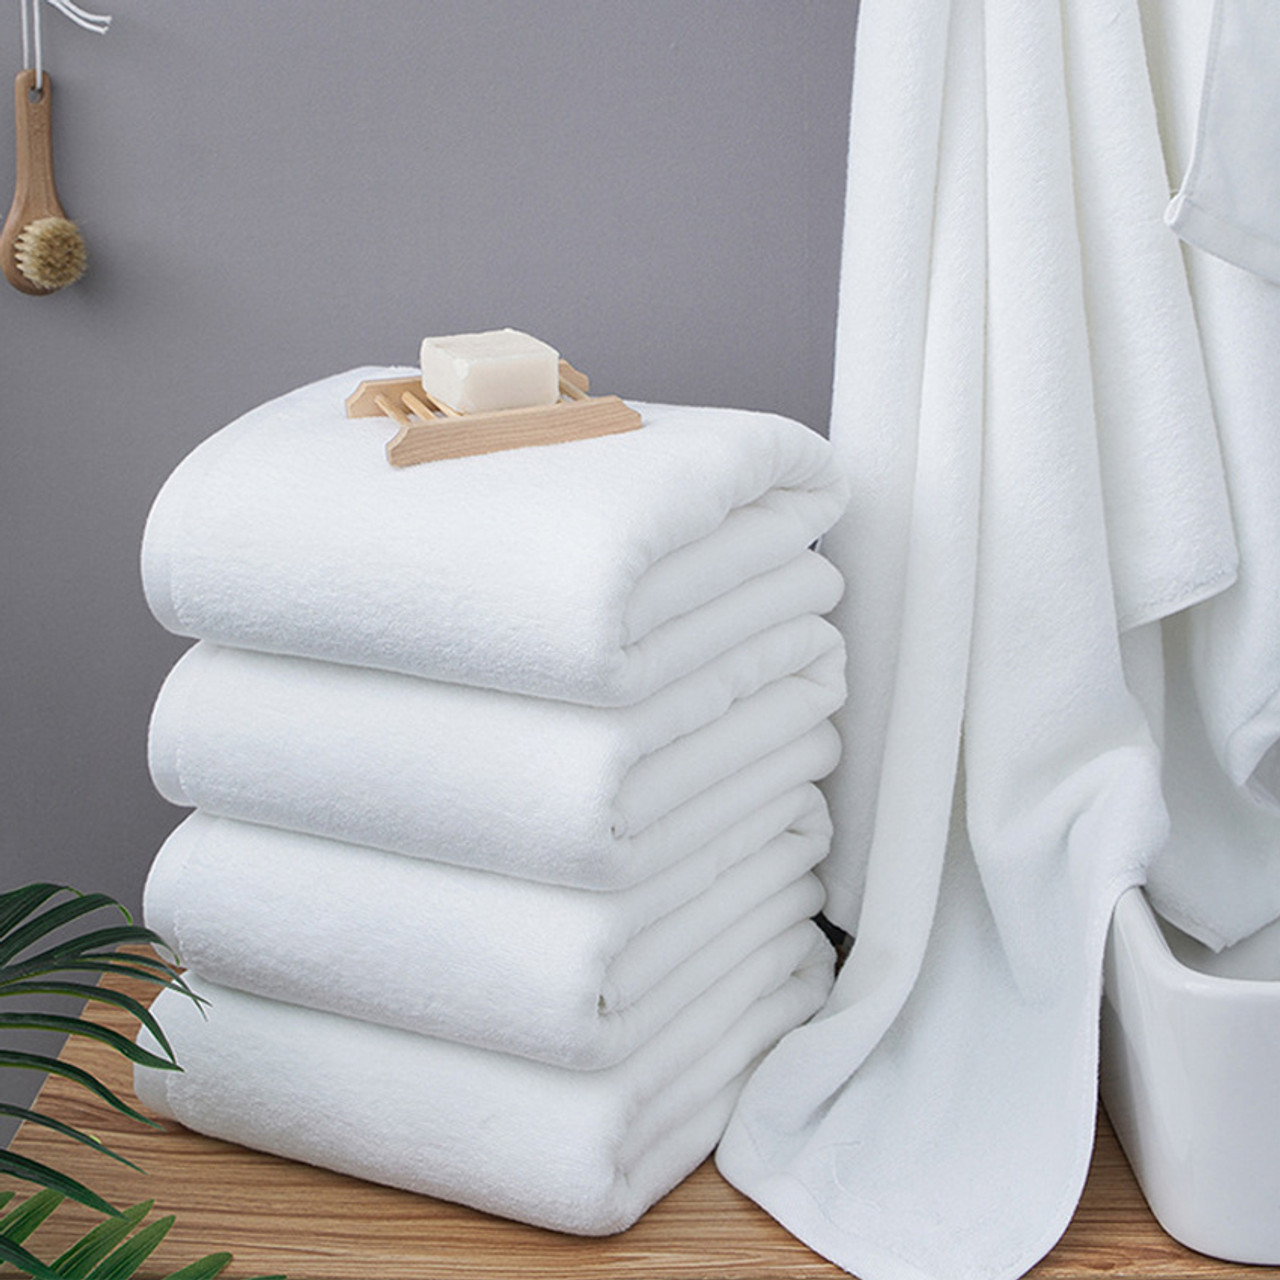 Belize White Textured 100% Cotton Pool Towel Hotel Pool Towels